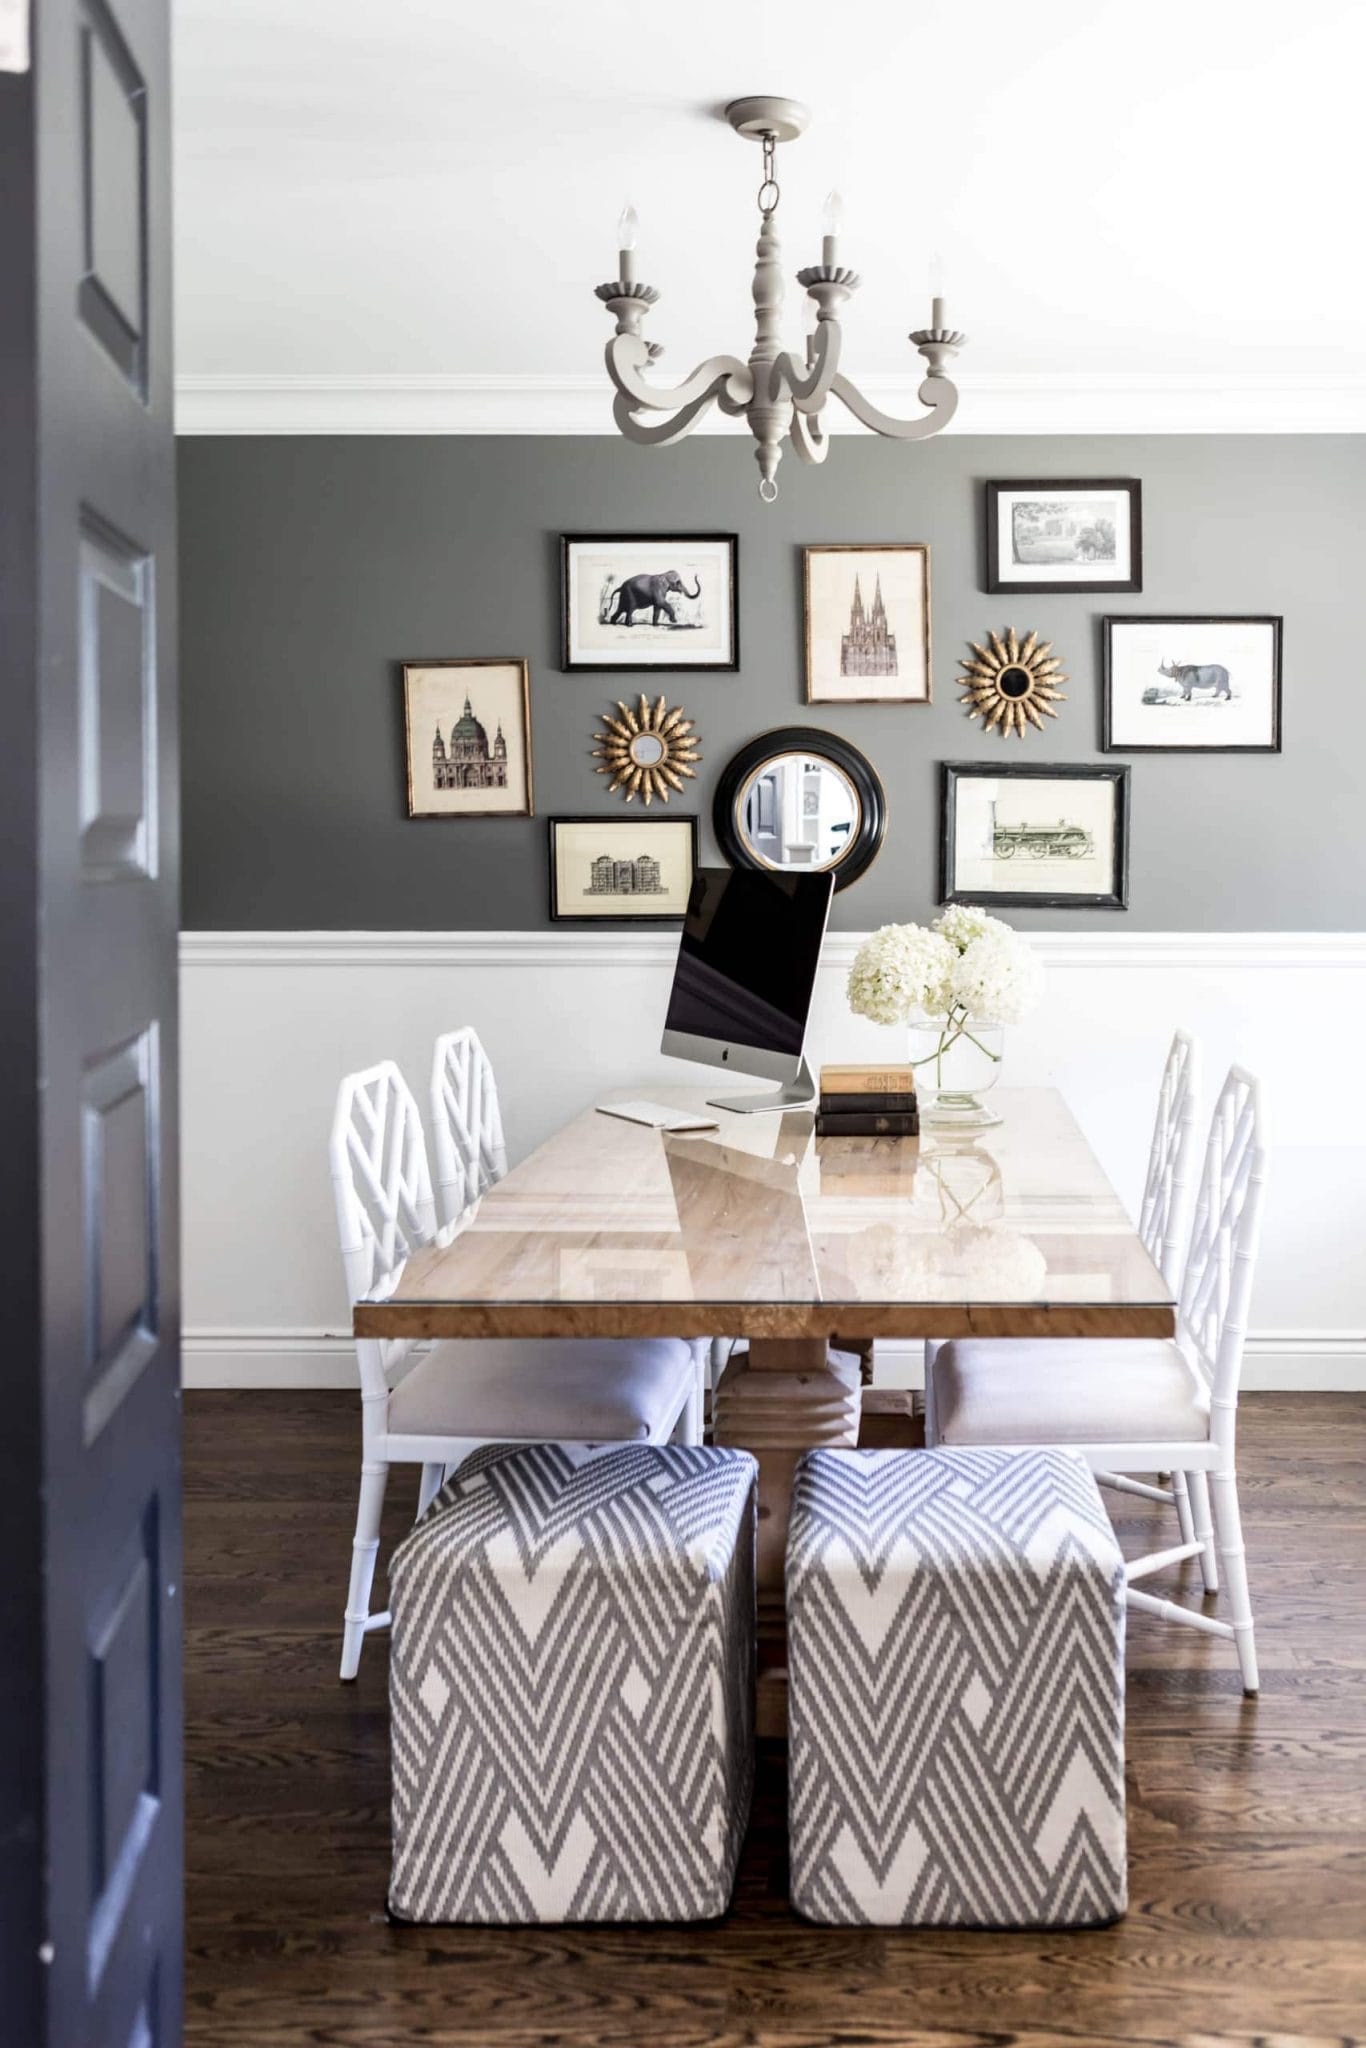 Black and white dinning room with pictures of animals on the wall